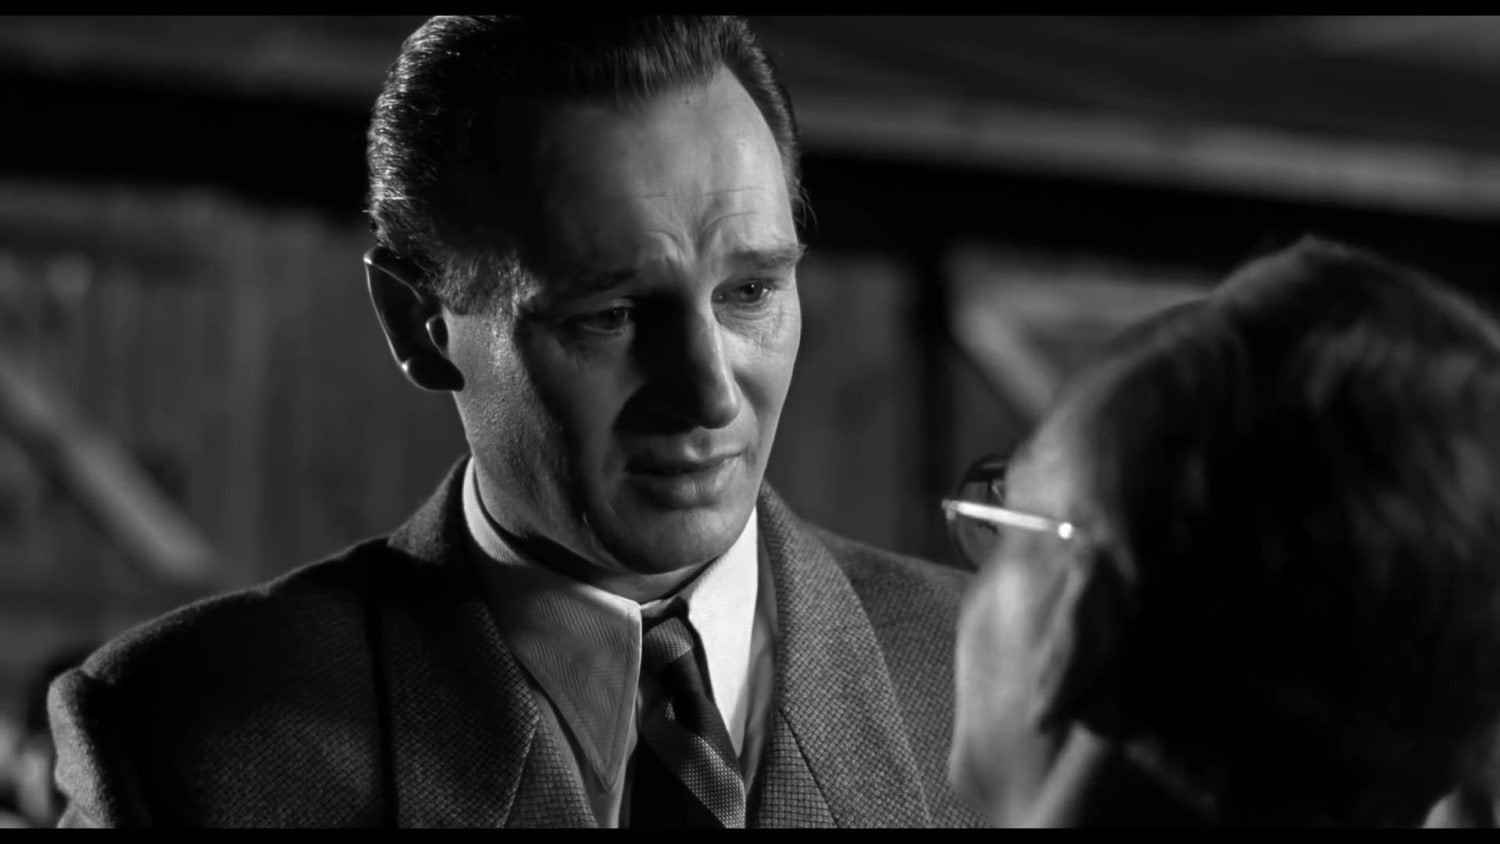 "I didn't do enough", "You did so much" - Liam Neeson and Ben Kingsley near the end of Schindler's List (1993)